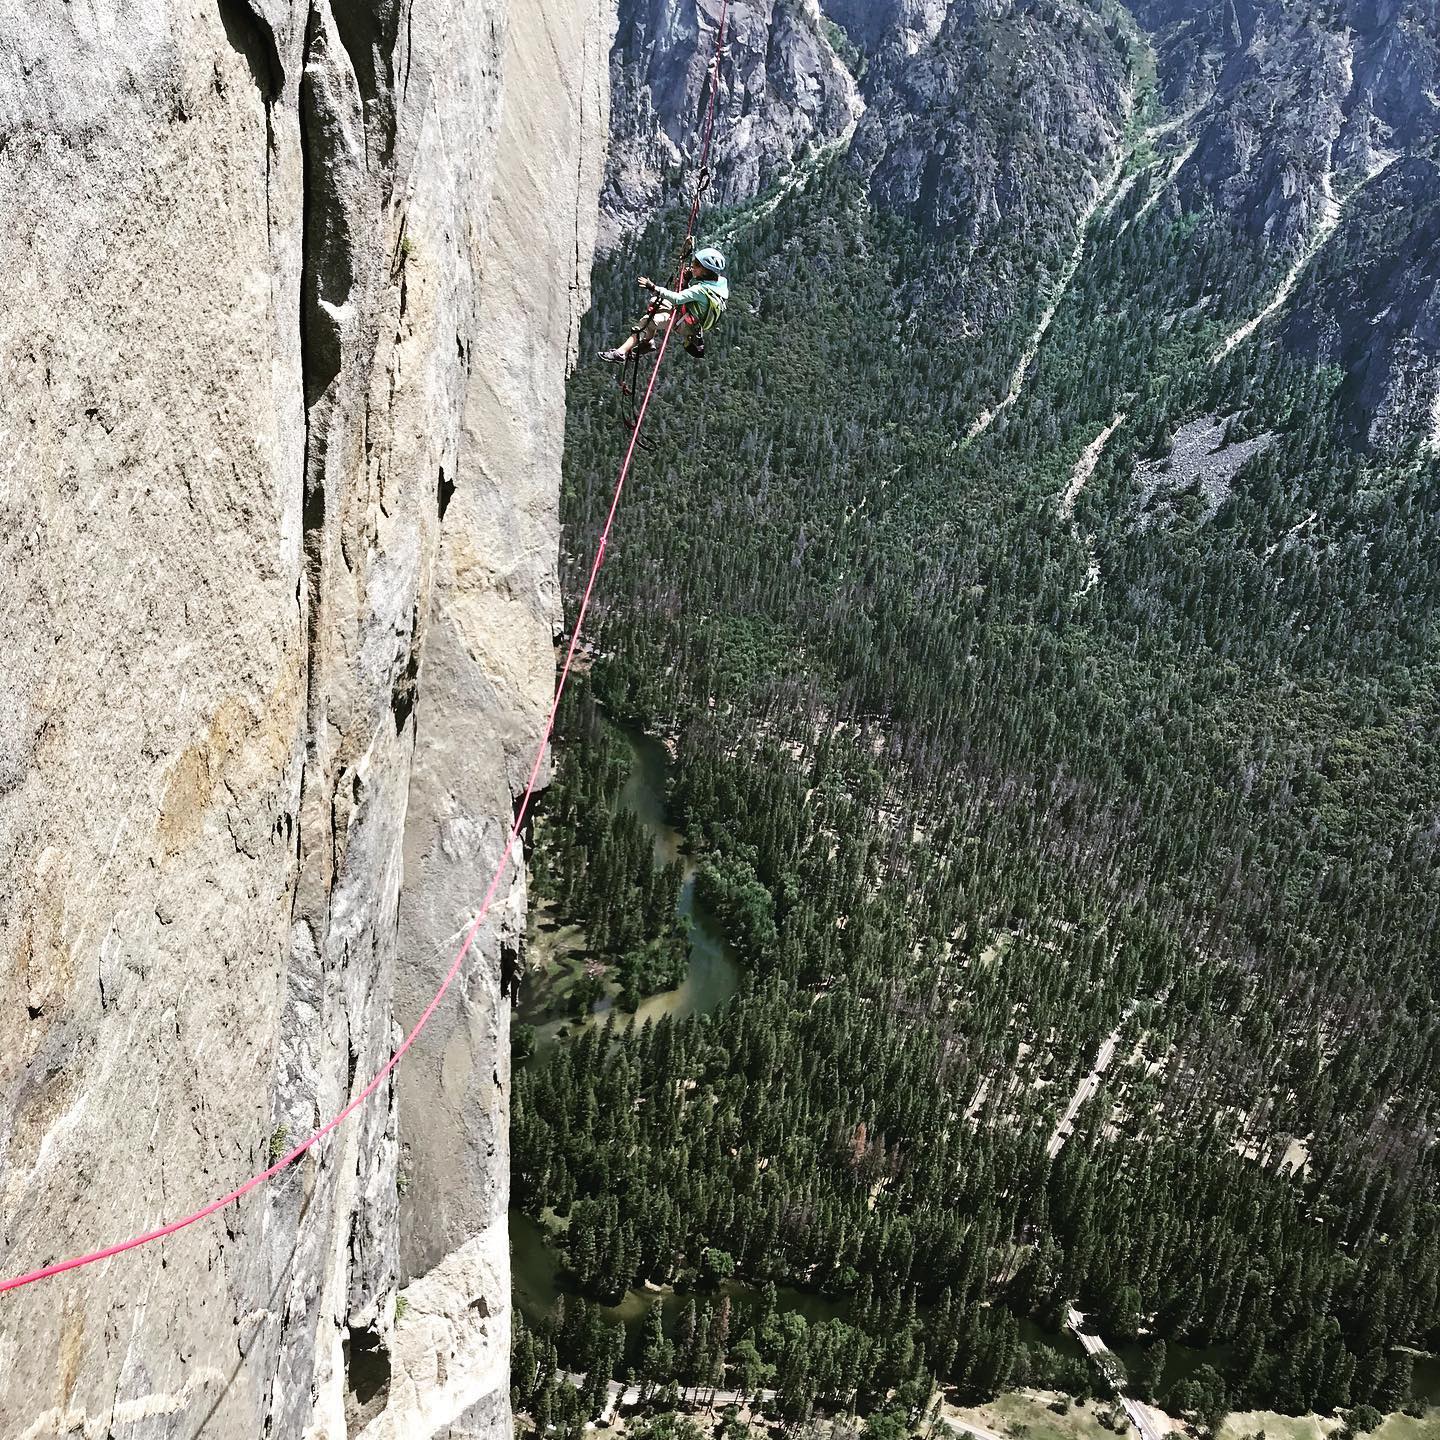 Selah jumaring on the Nose. Her dad estimates that she cleaned 80 percent of the pitches on the route, which freed up the two adults to haul the bag. [Photo] Schneiter family collection